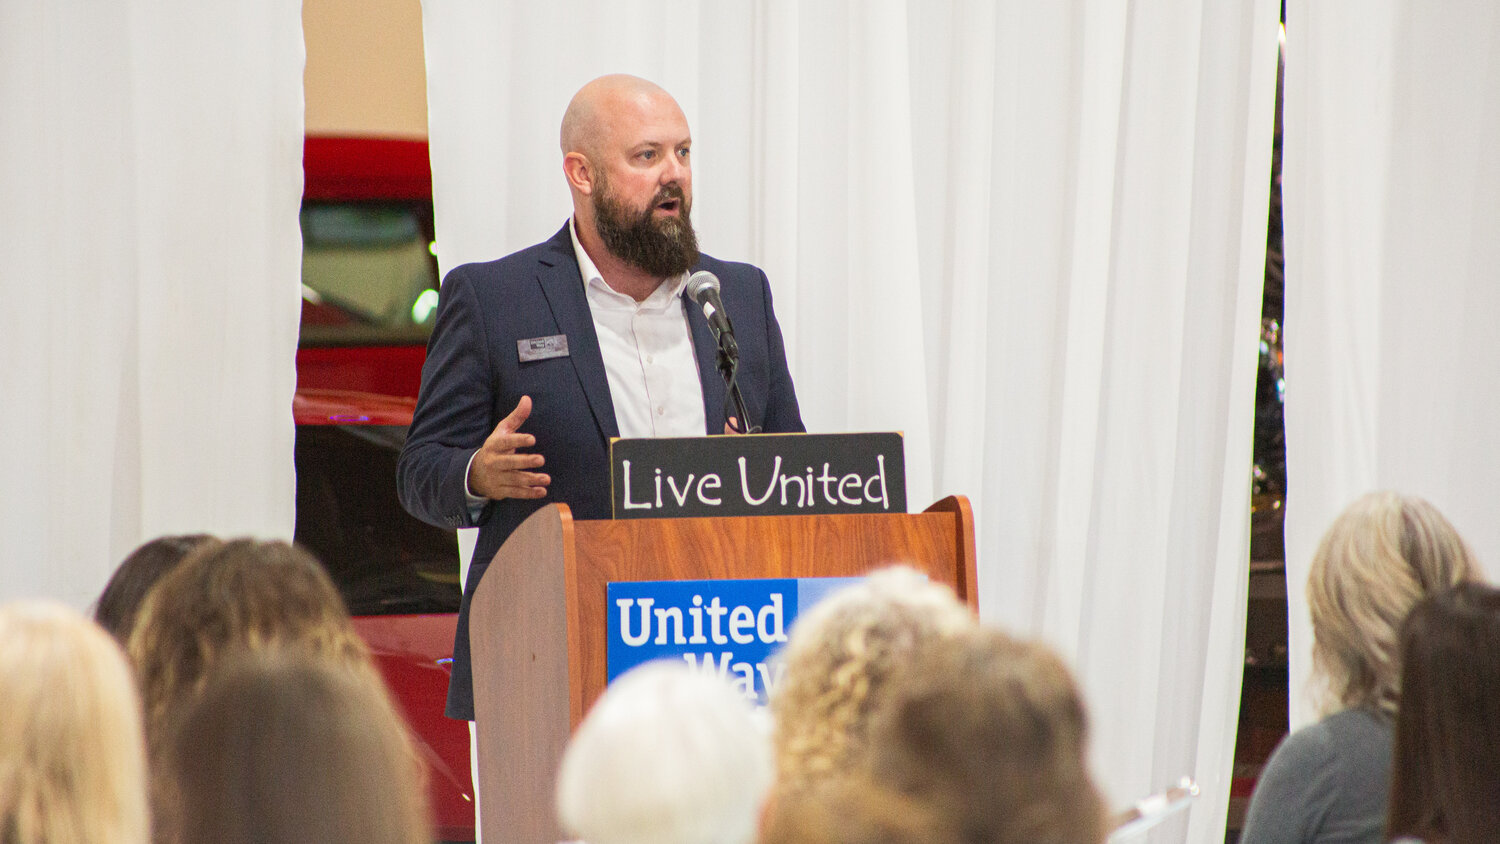 Chris Judd speaks during a United Way “Community Impact Luncheon” hosted at the Jester Auto Museum in Chehalis on Thursday, Sept. 7.